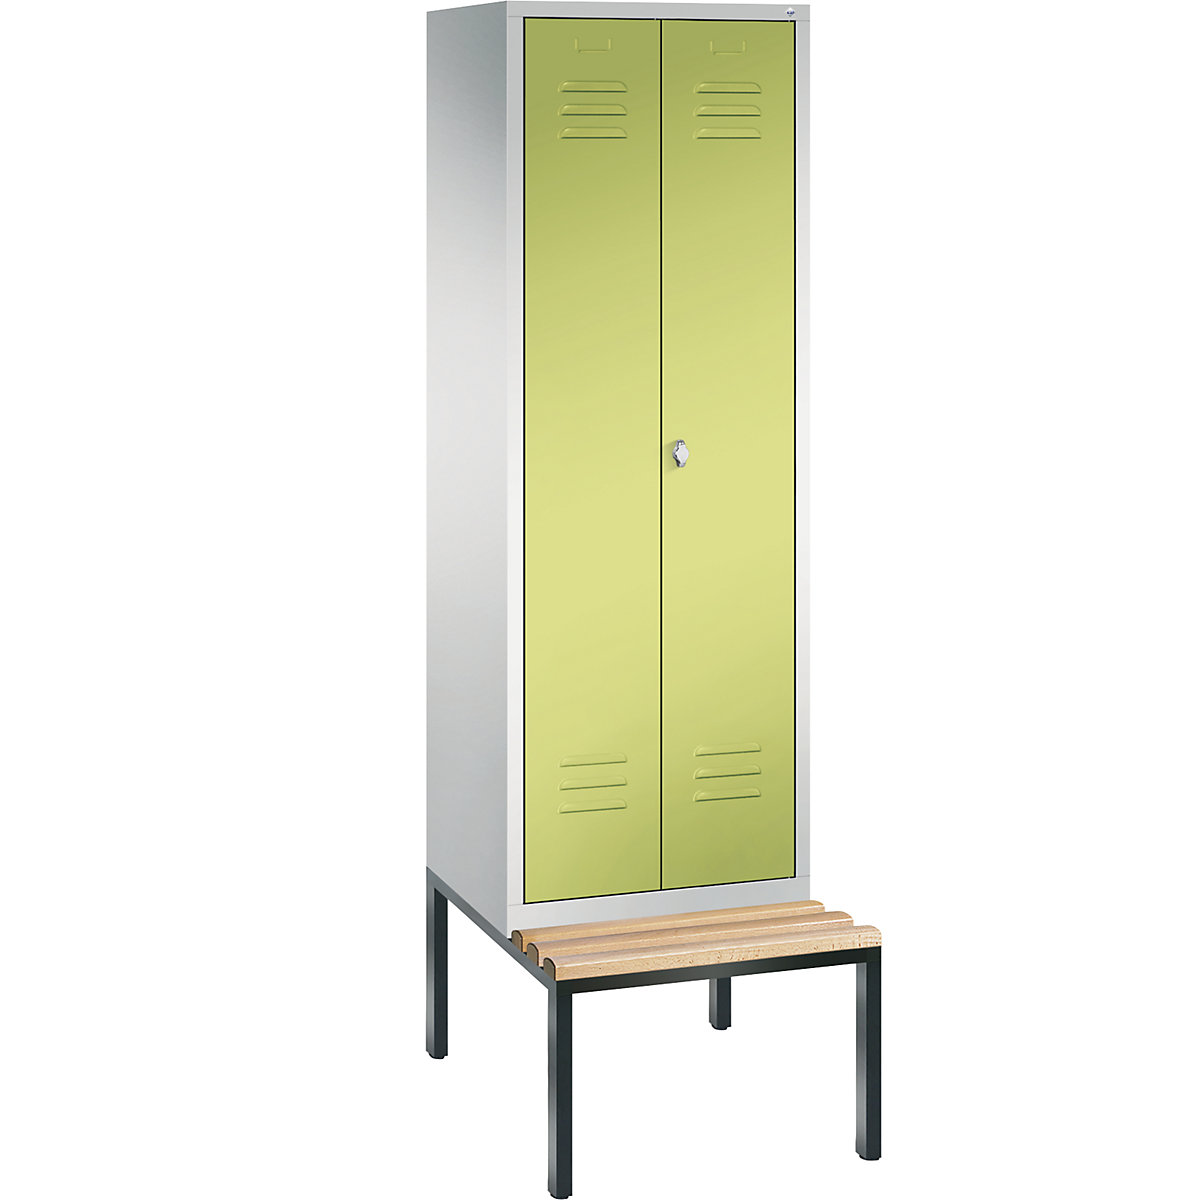 CLASSIC cloakroom locker with bench mounted underneath, doors close in the middle – C+P